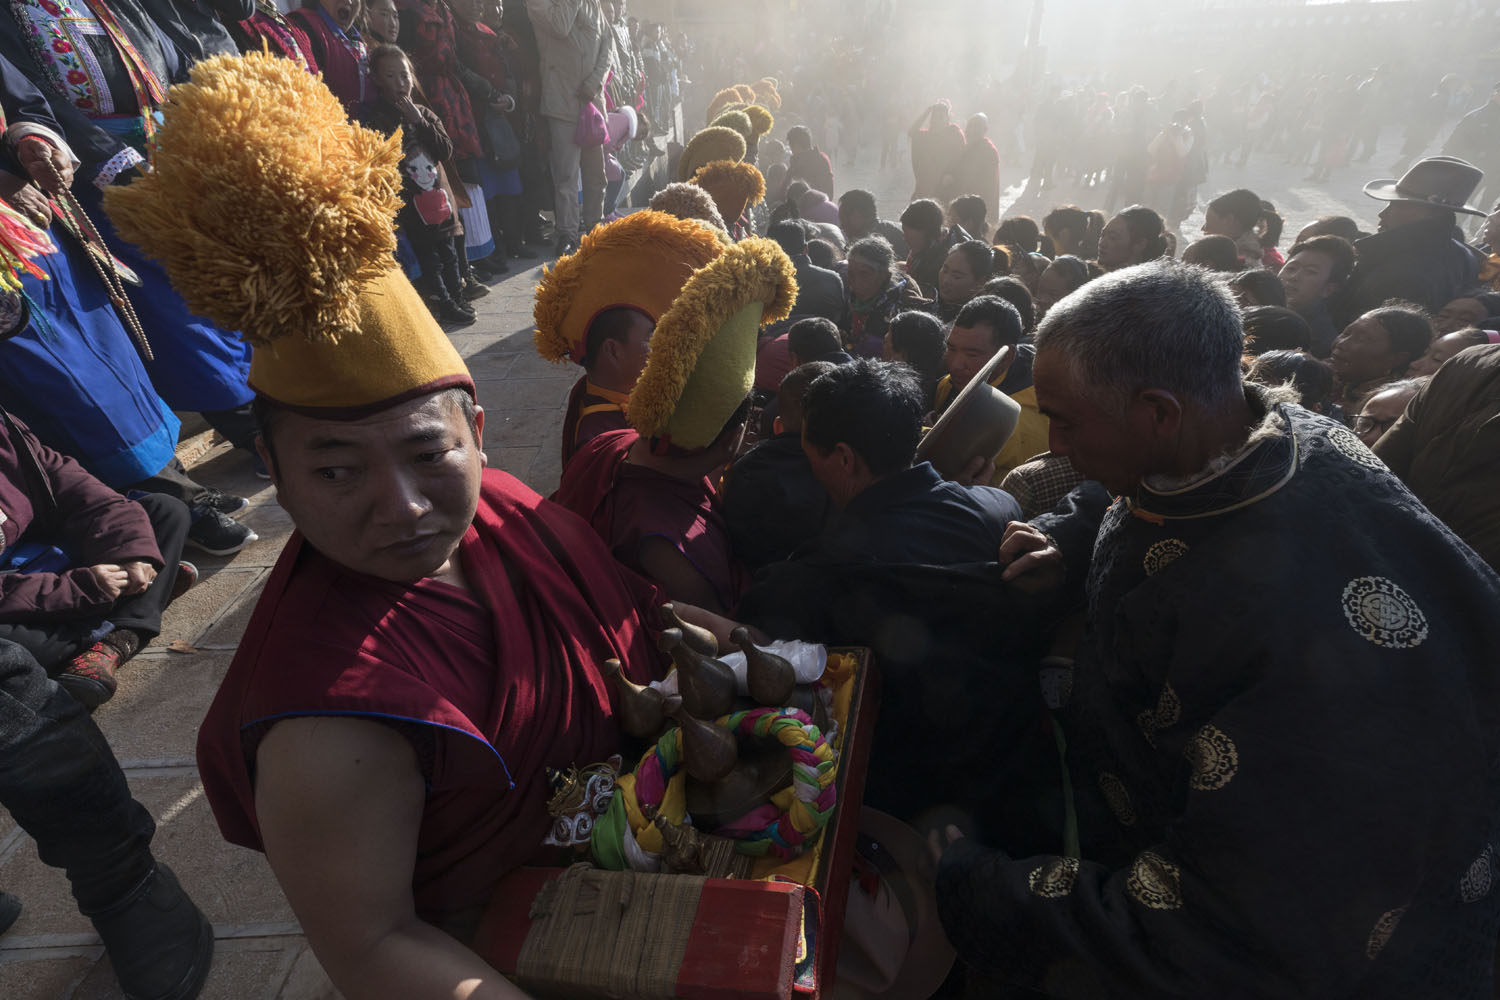 Devotees make offerings of prayer in return for blessings by the Tibetan Buddhist monks at SongZangLin Monastery in JingXiang Village. Yunnan, China. March 2, 2018.